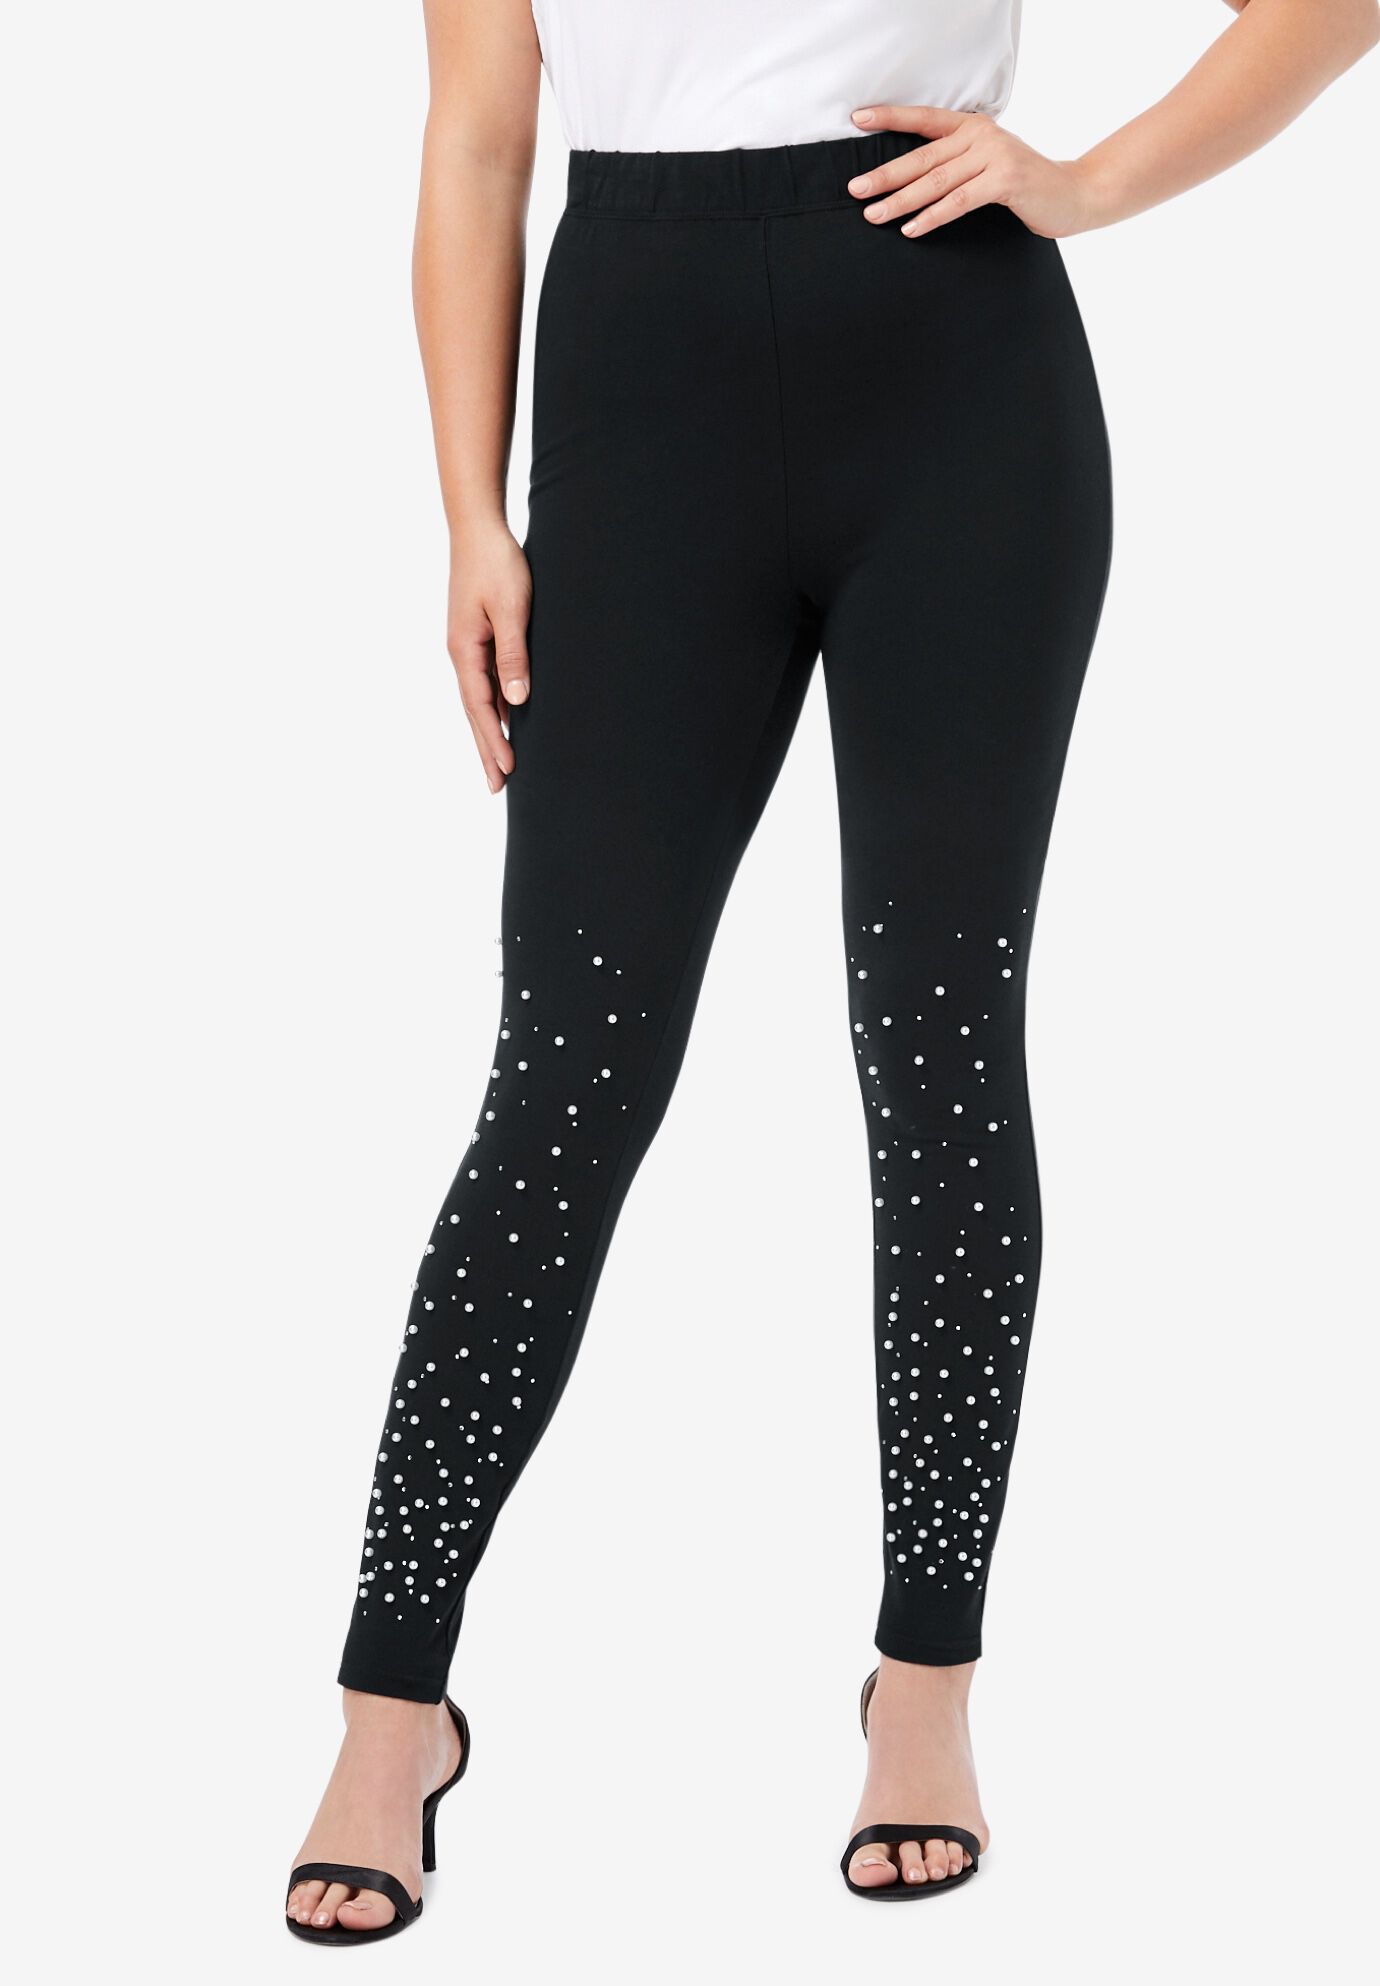 Black Full Stretch Yoga Leggings with Pearl Detailing for Women and Girls -  Elevate Your Gym Style